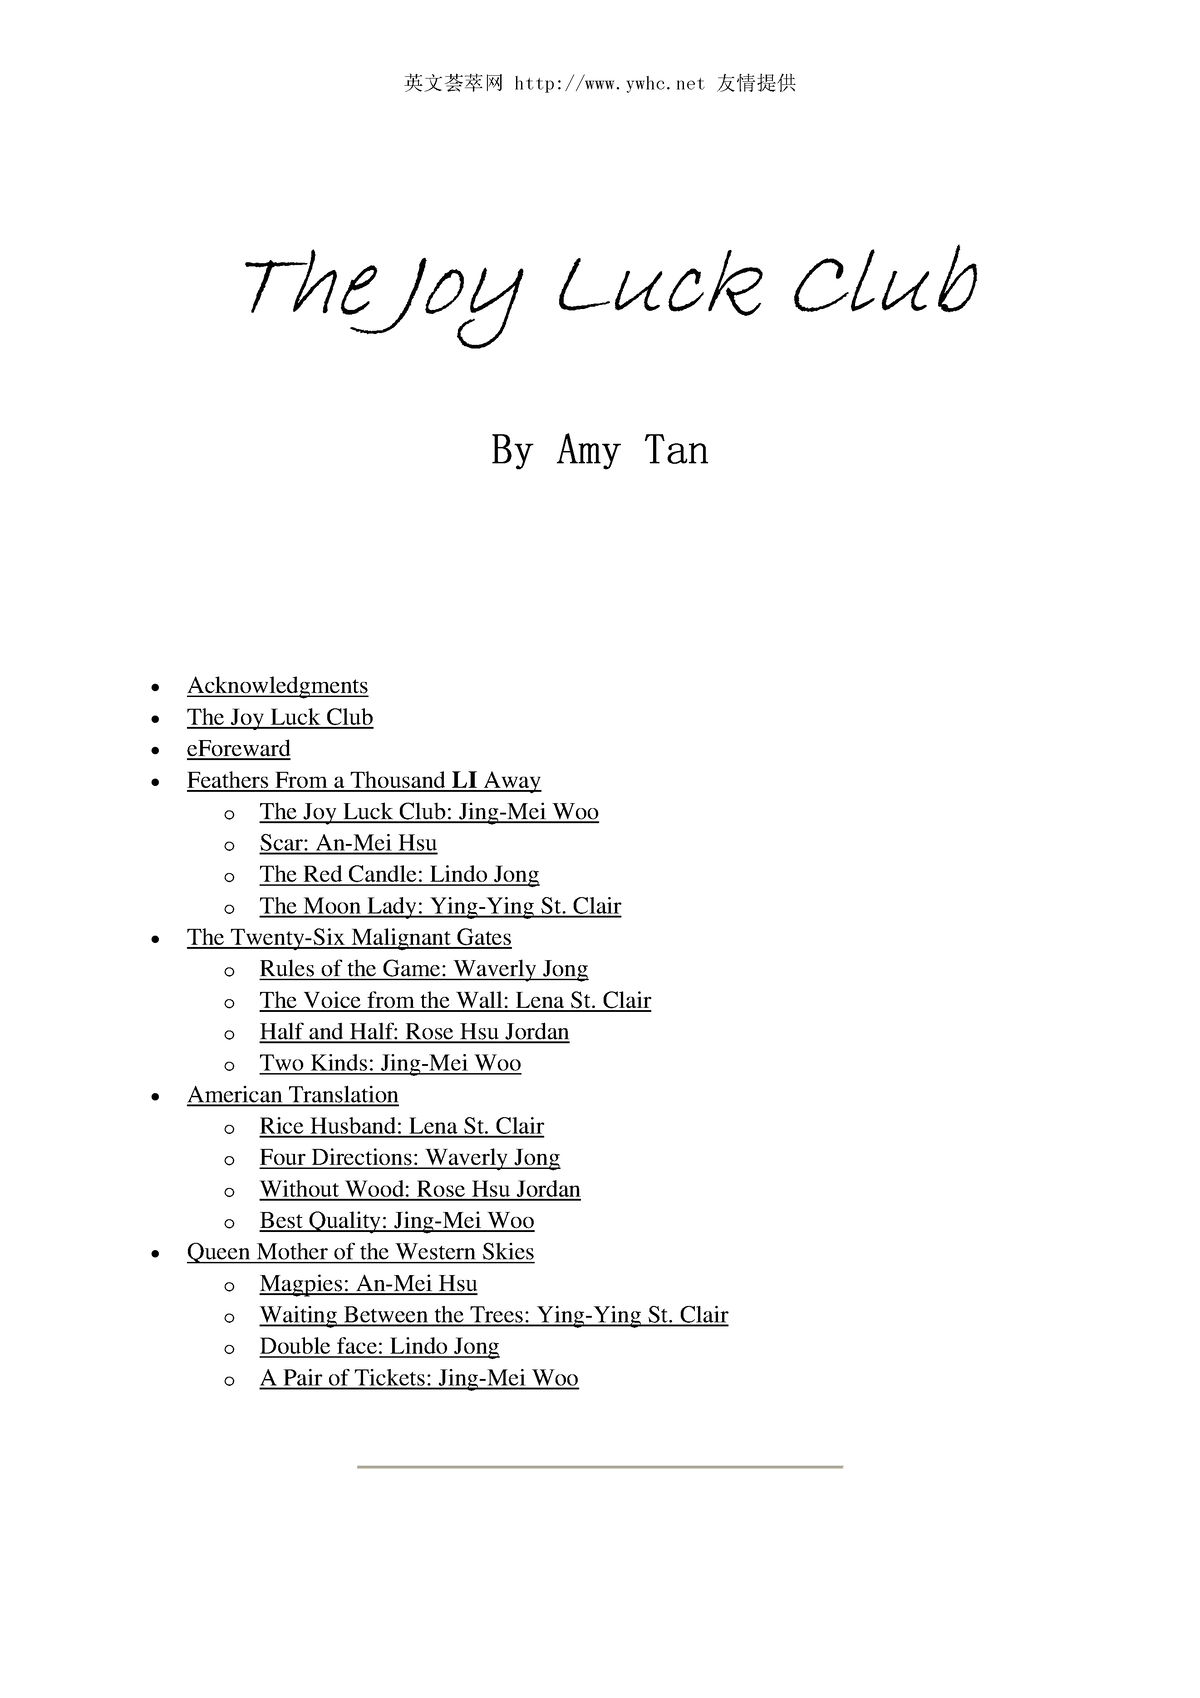 thesis for the joy luck club